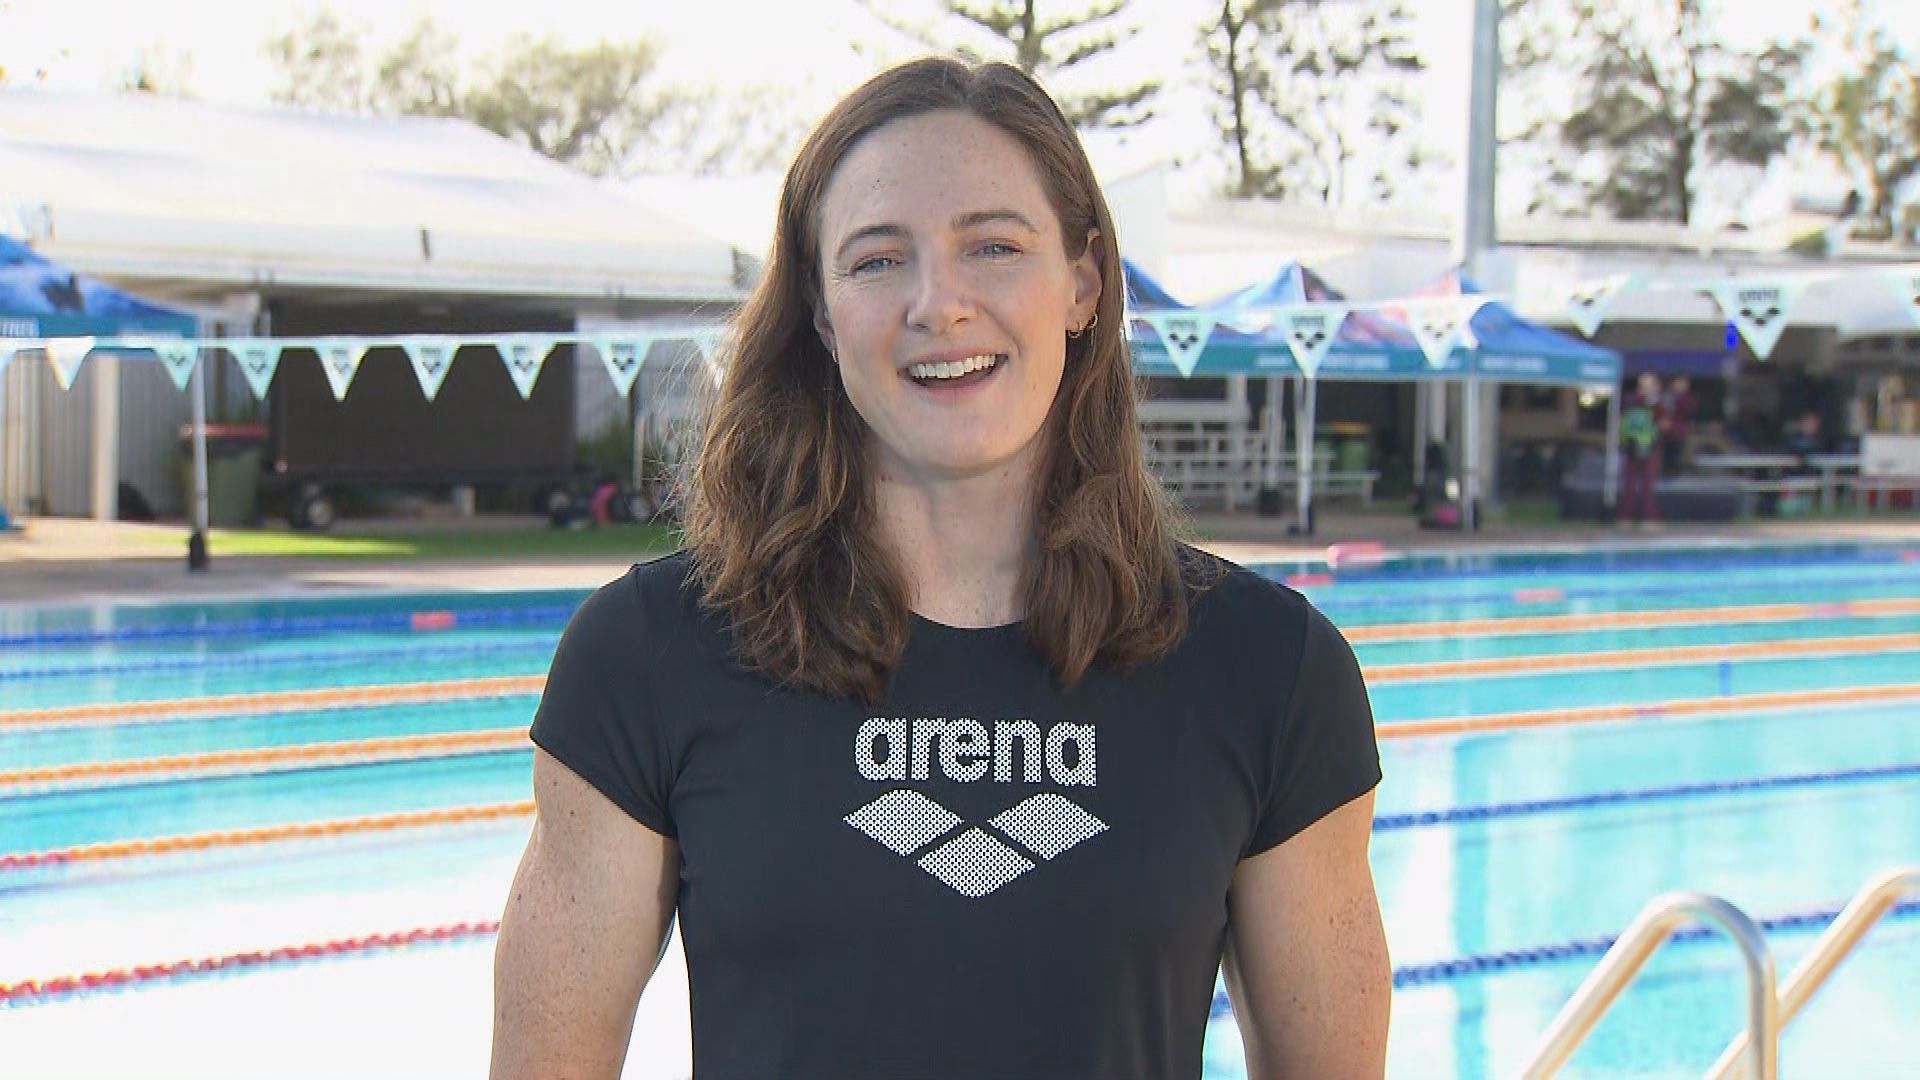 'Scary' 1am phone call from stranger rocks Olympic star Cate Campbell